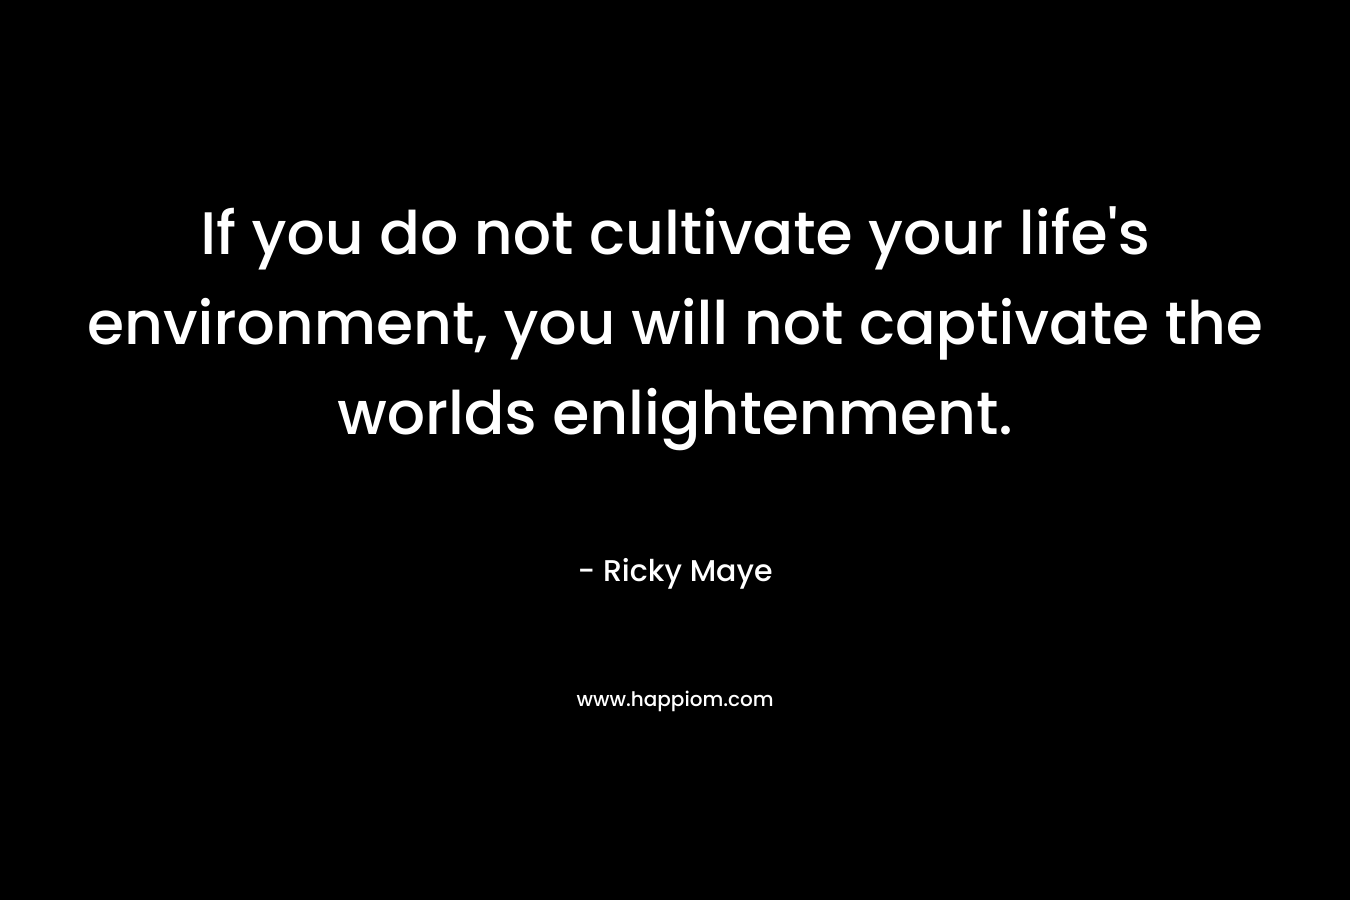 If you do not cultivate your life's environment, you will not captivate the worlds enlightenment.